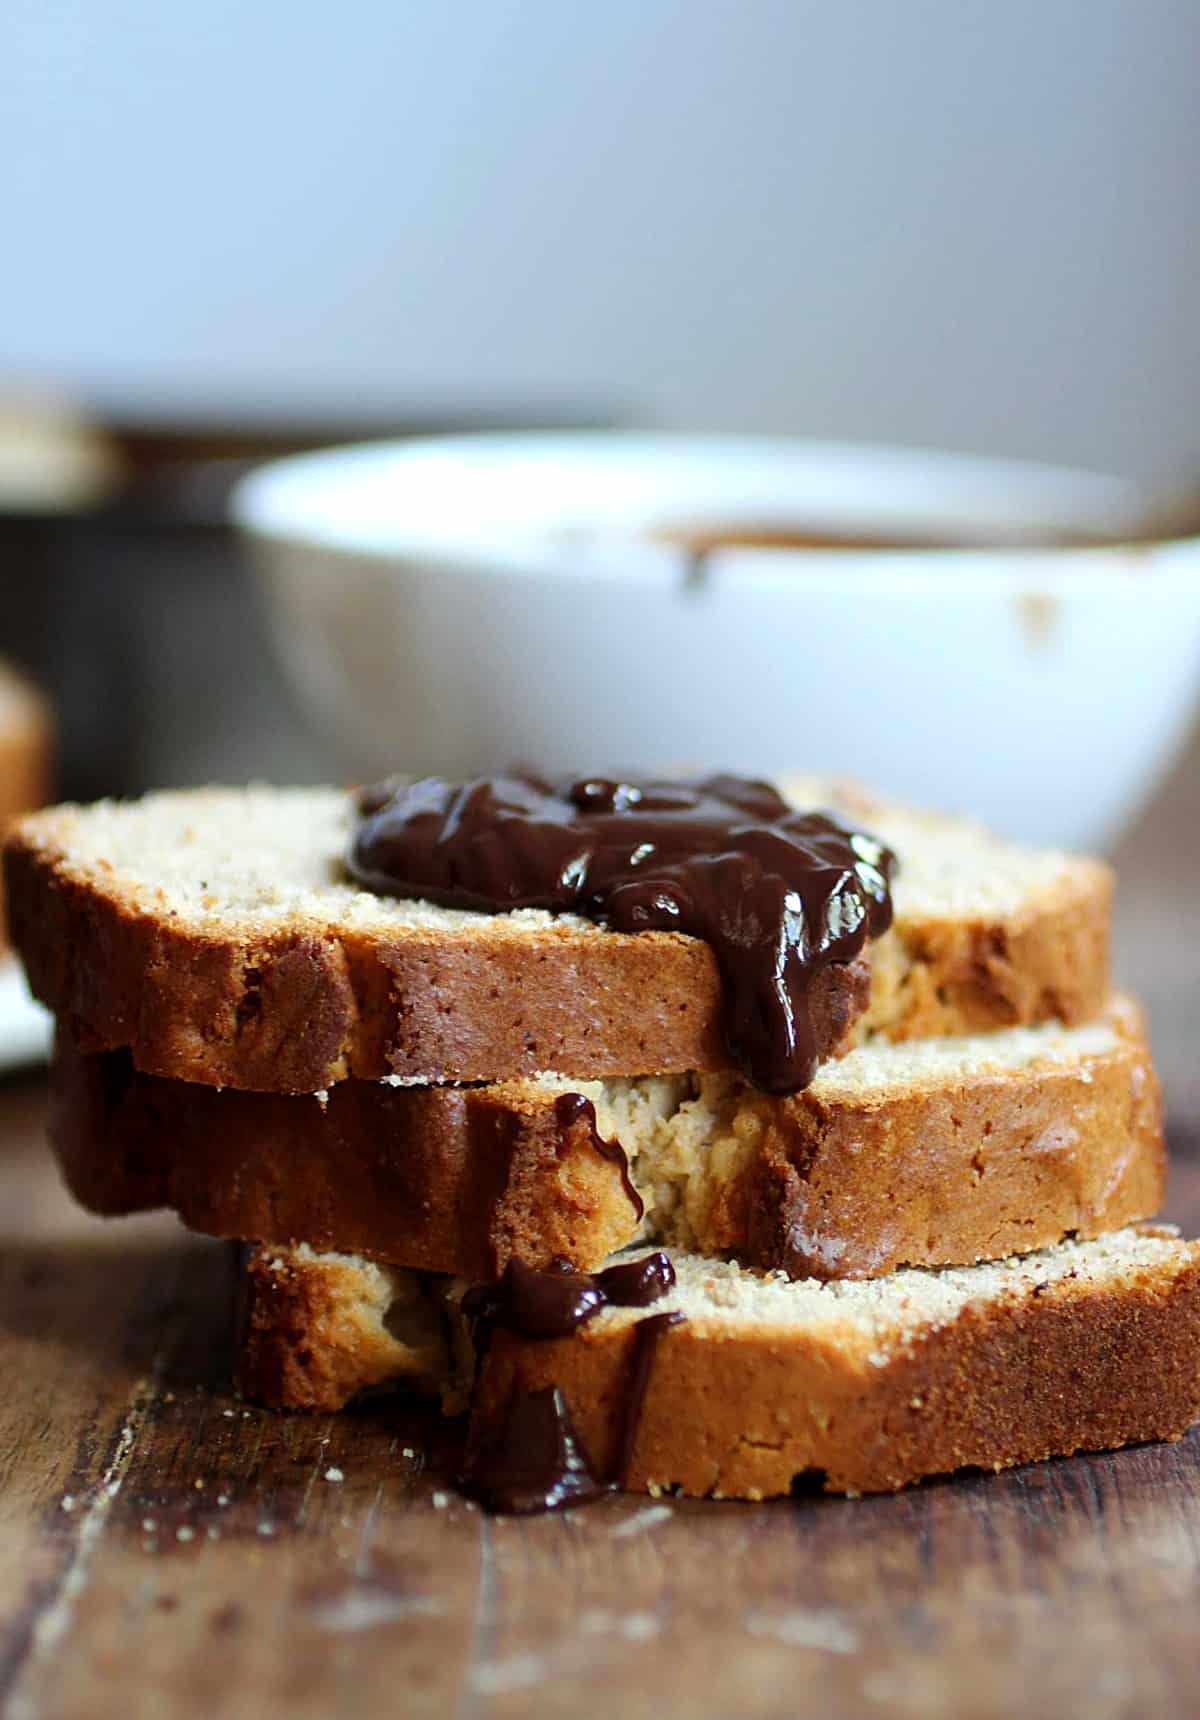 Slice of quick bread with chocolate sauce, wooden table, white bowl